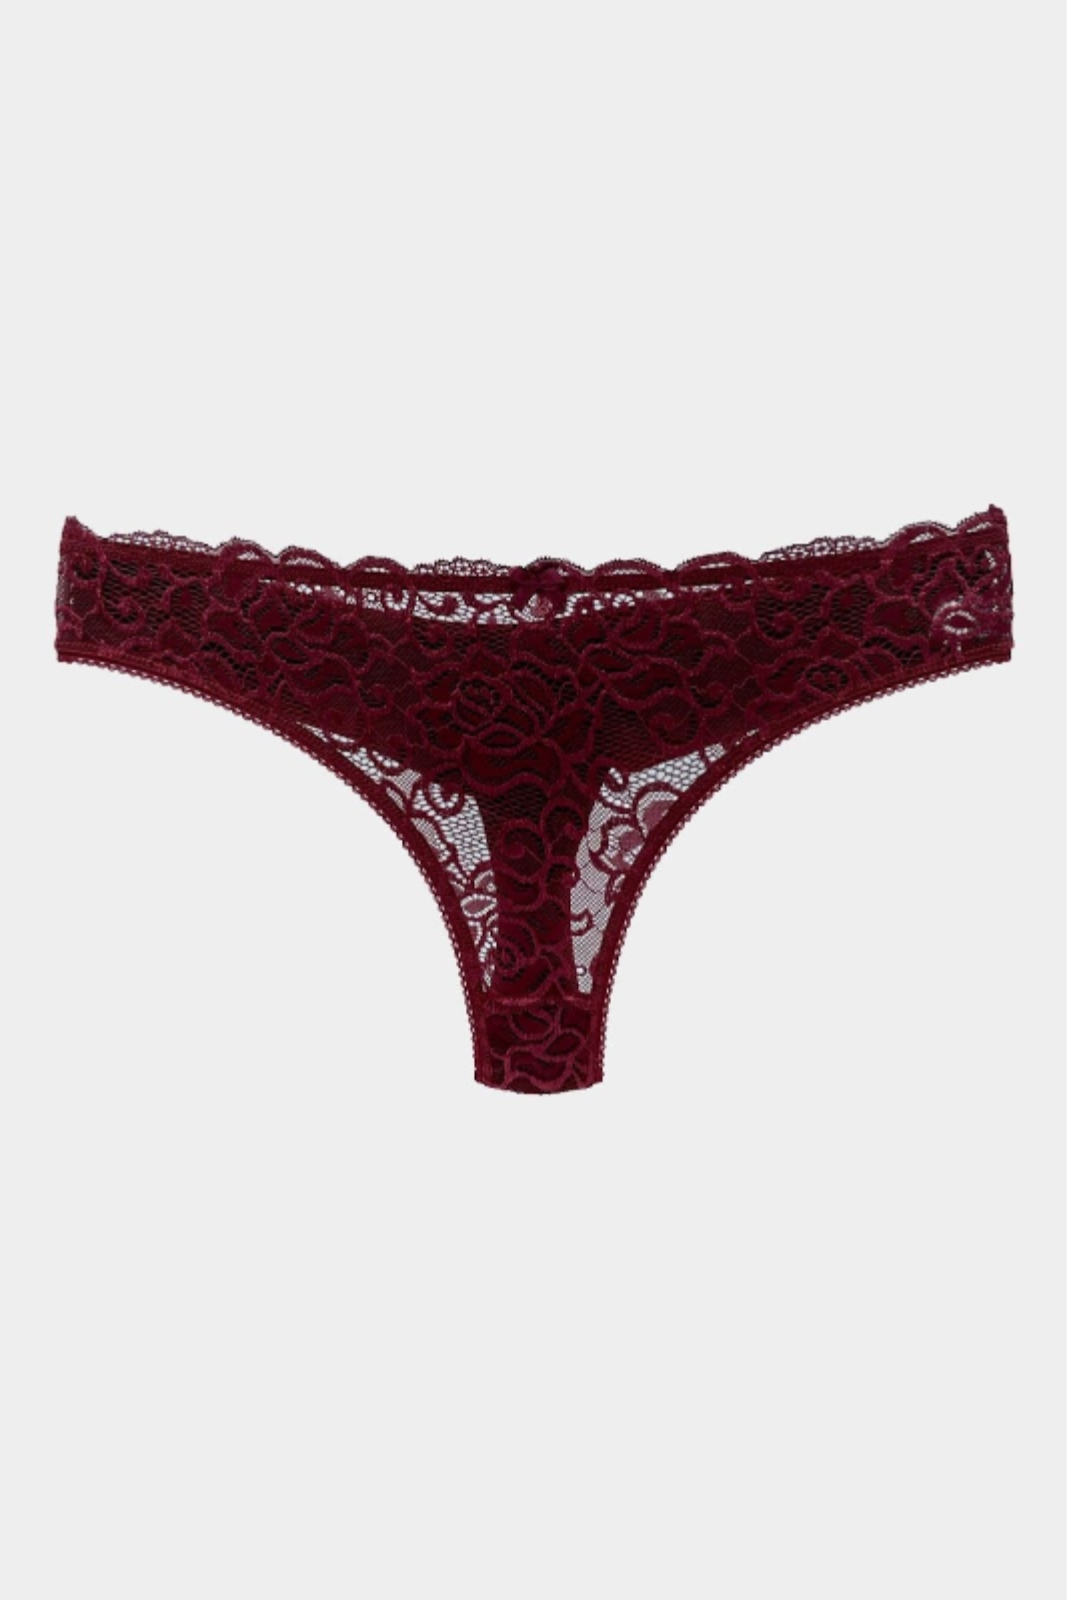 [Leanid Pavel] Lace Thong